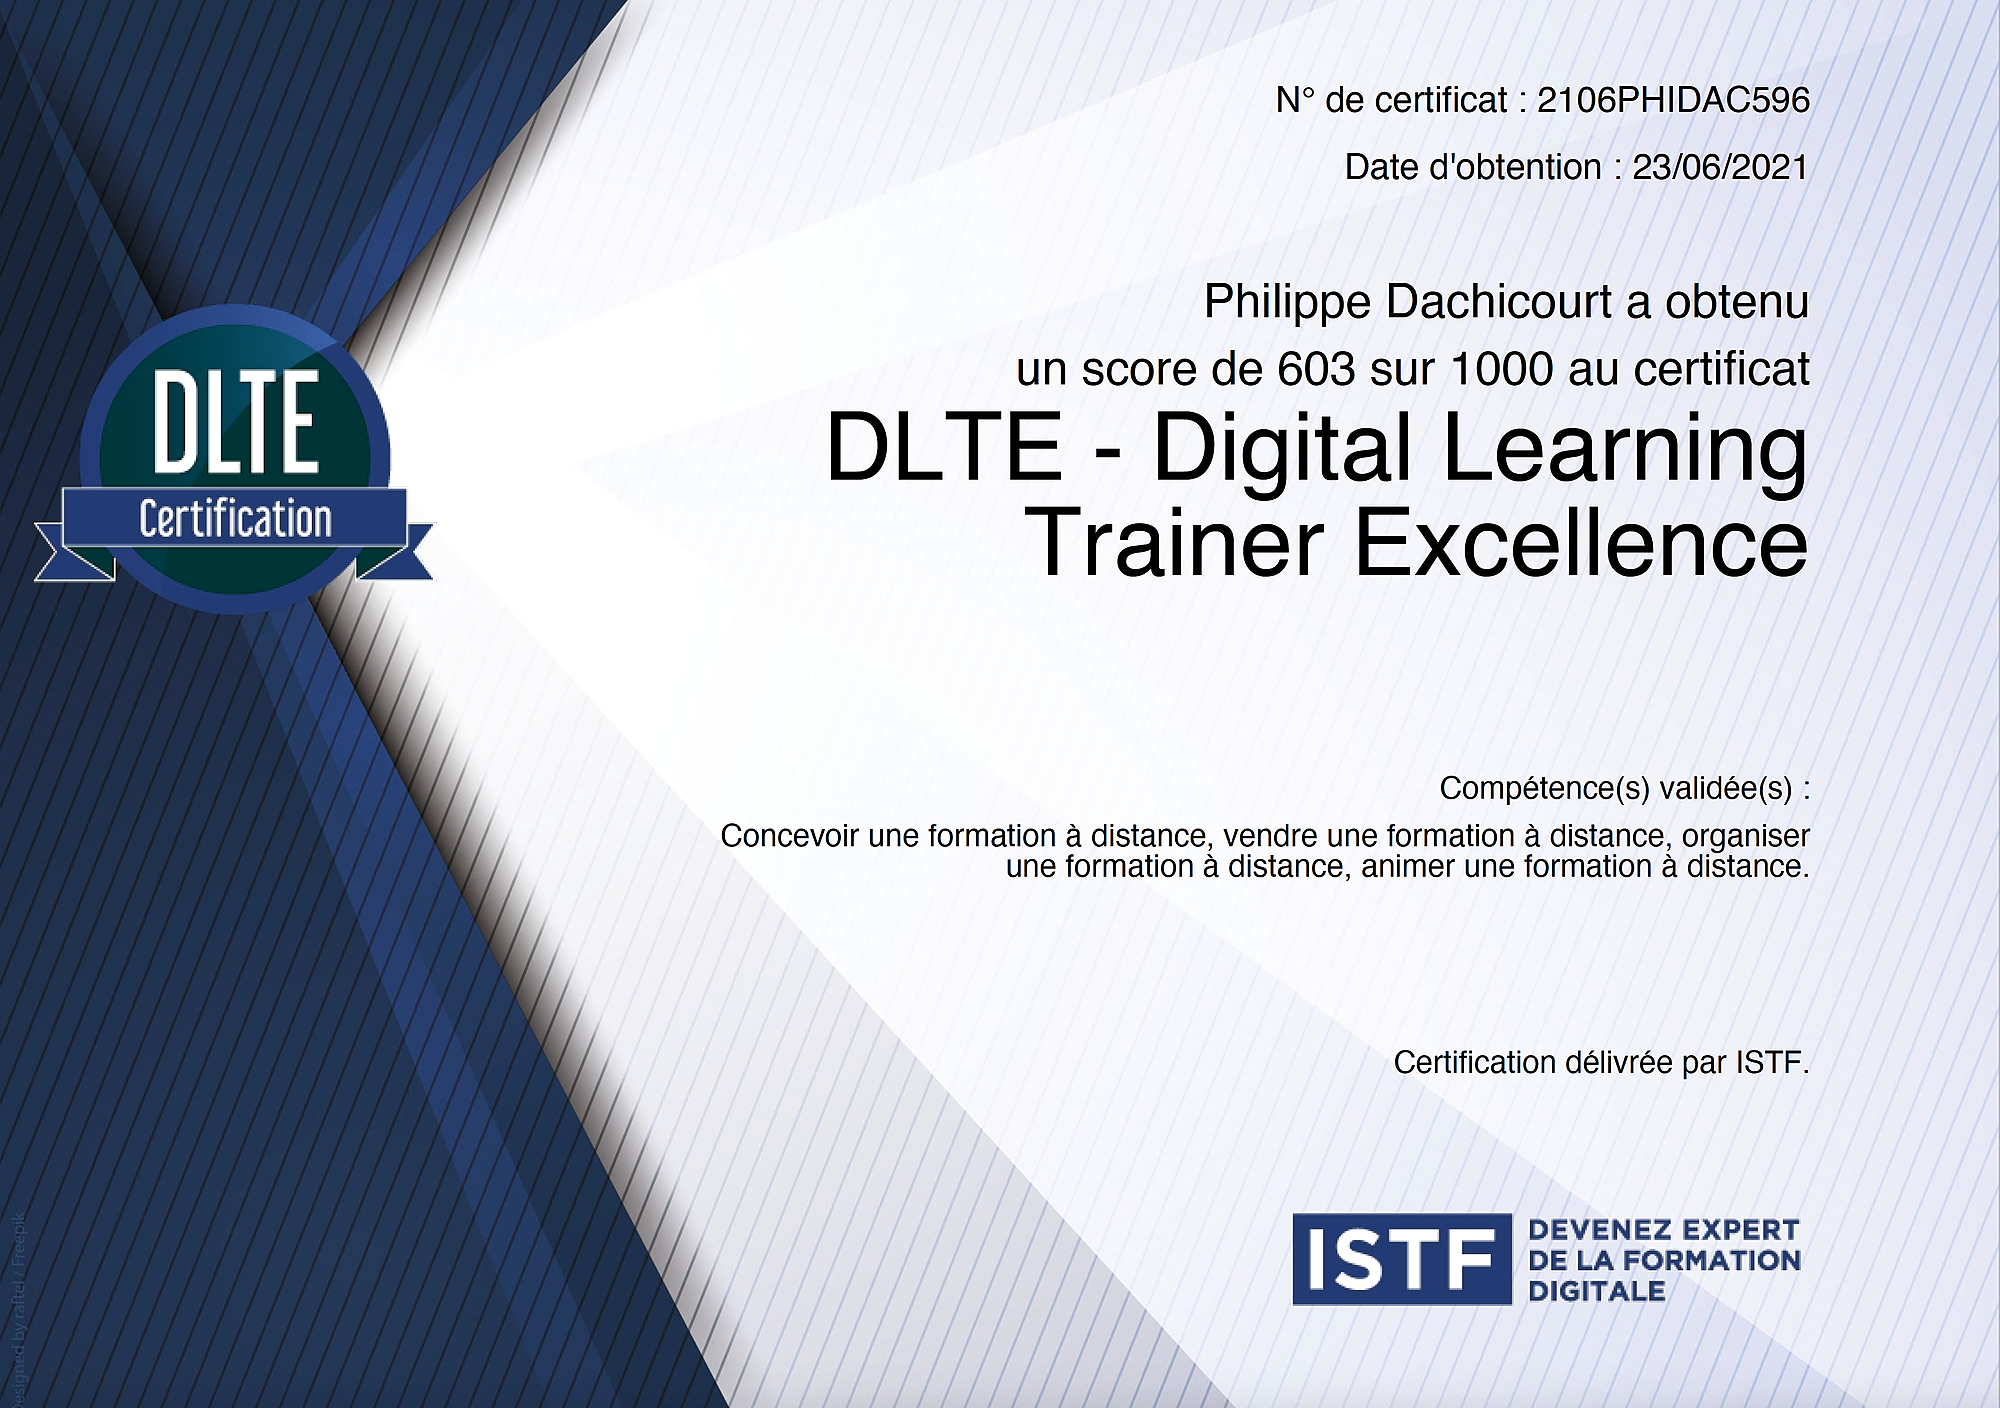 DLTE Digital Learning Trainer Excellence